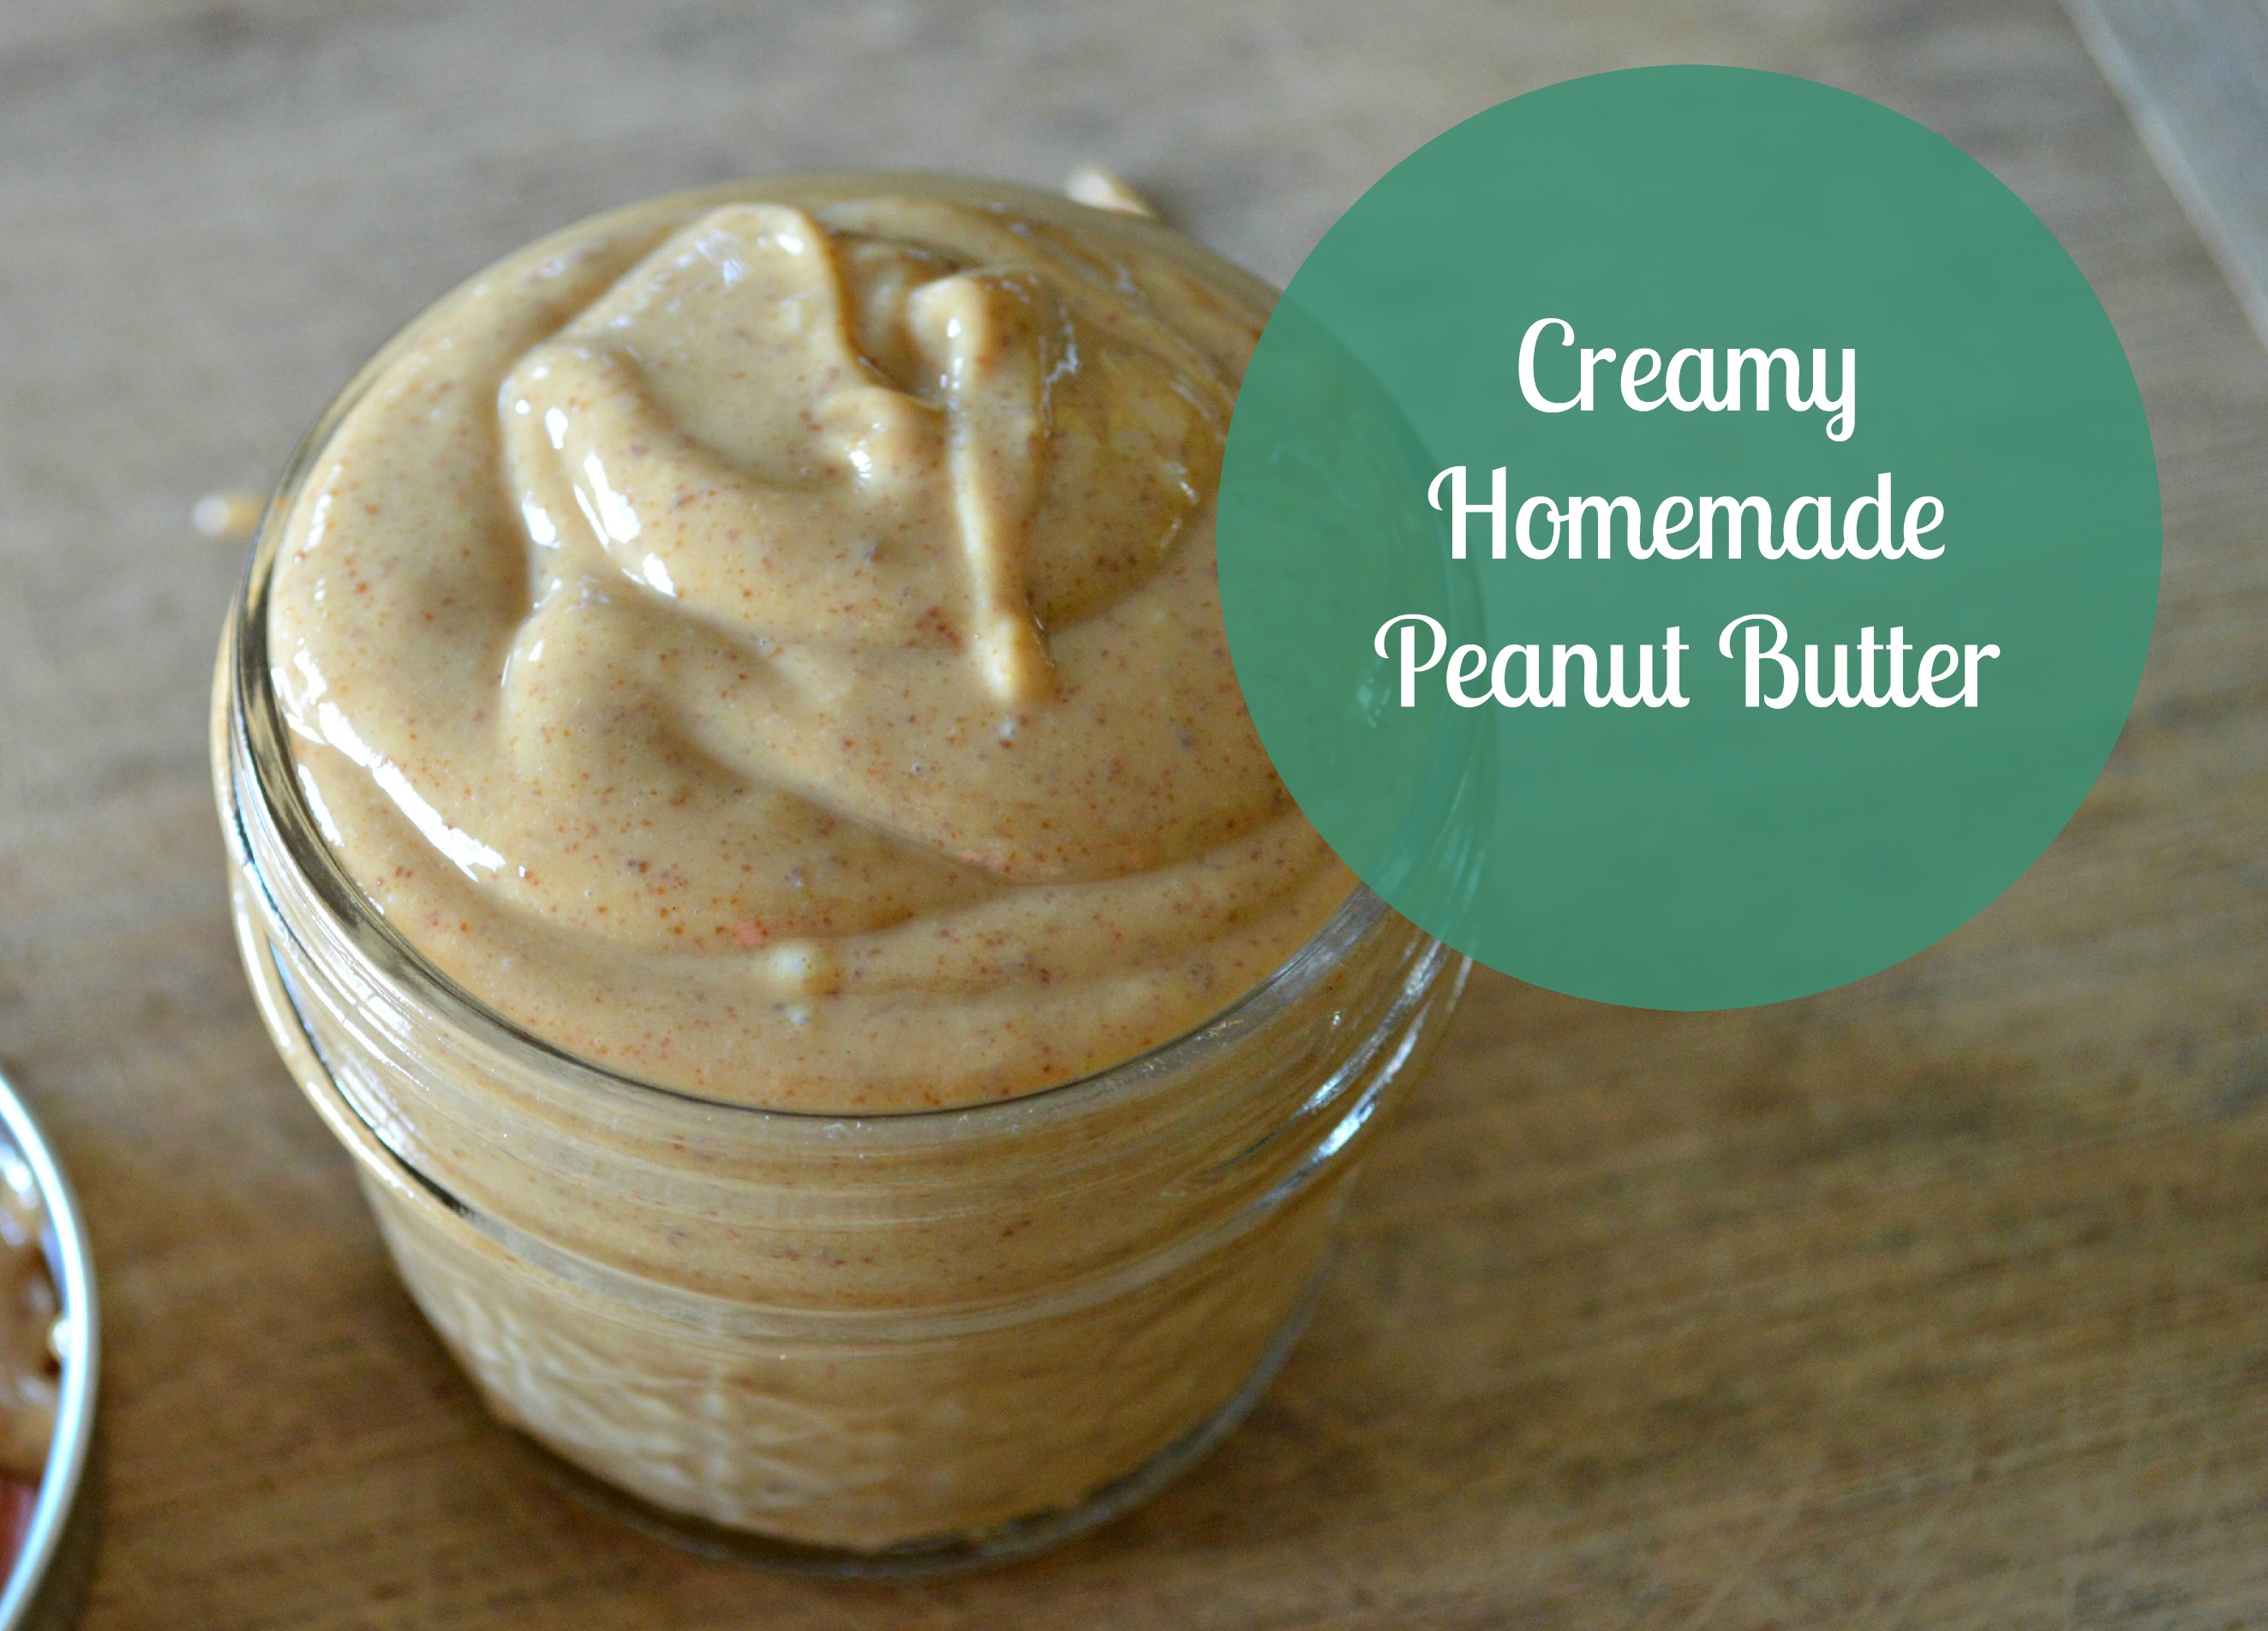 Homemade Peanut Butter - The House of Healthy